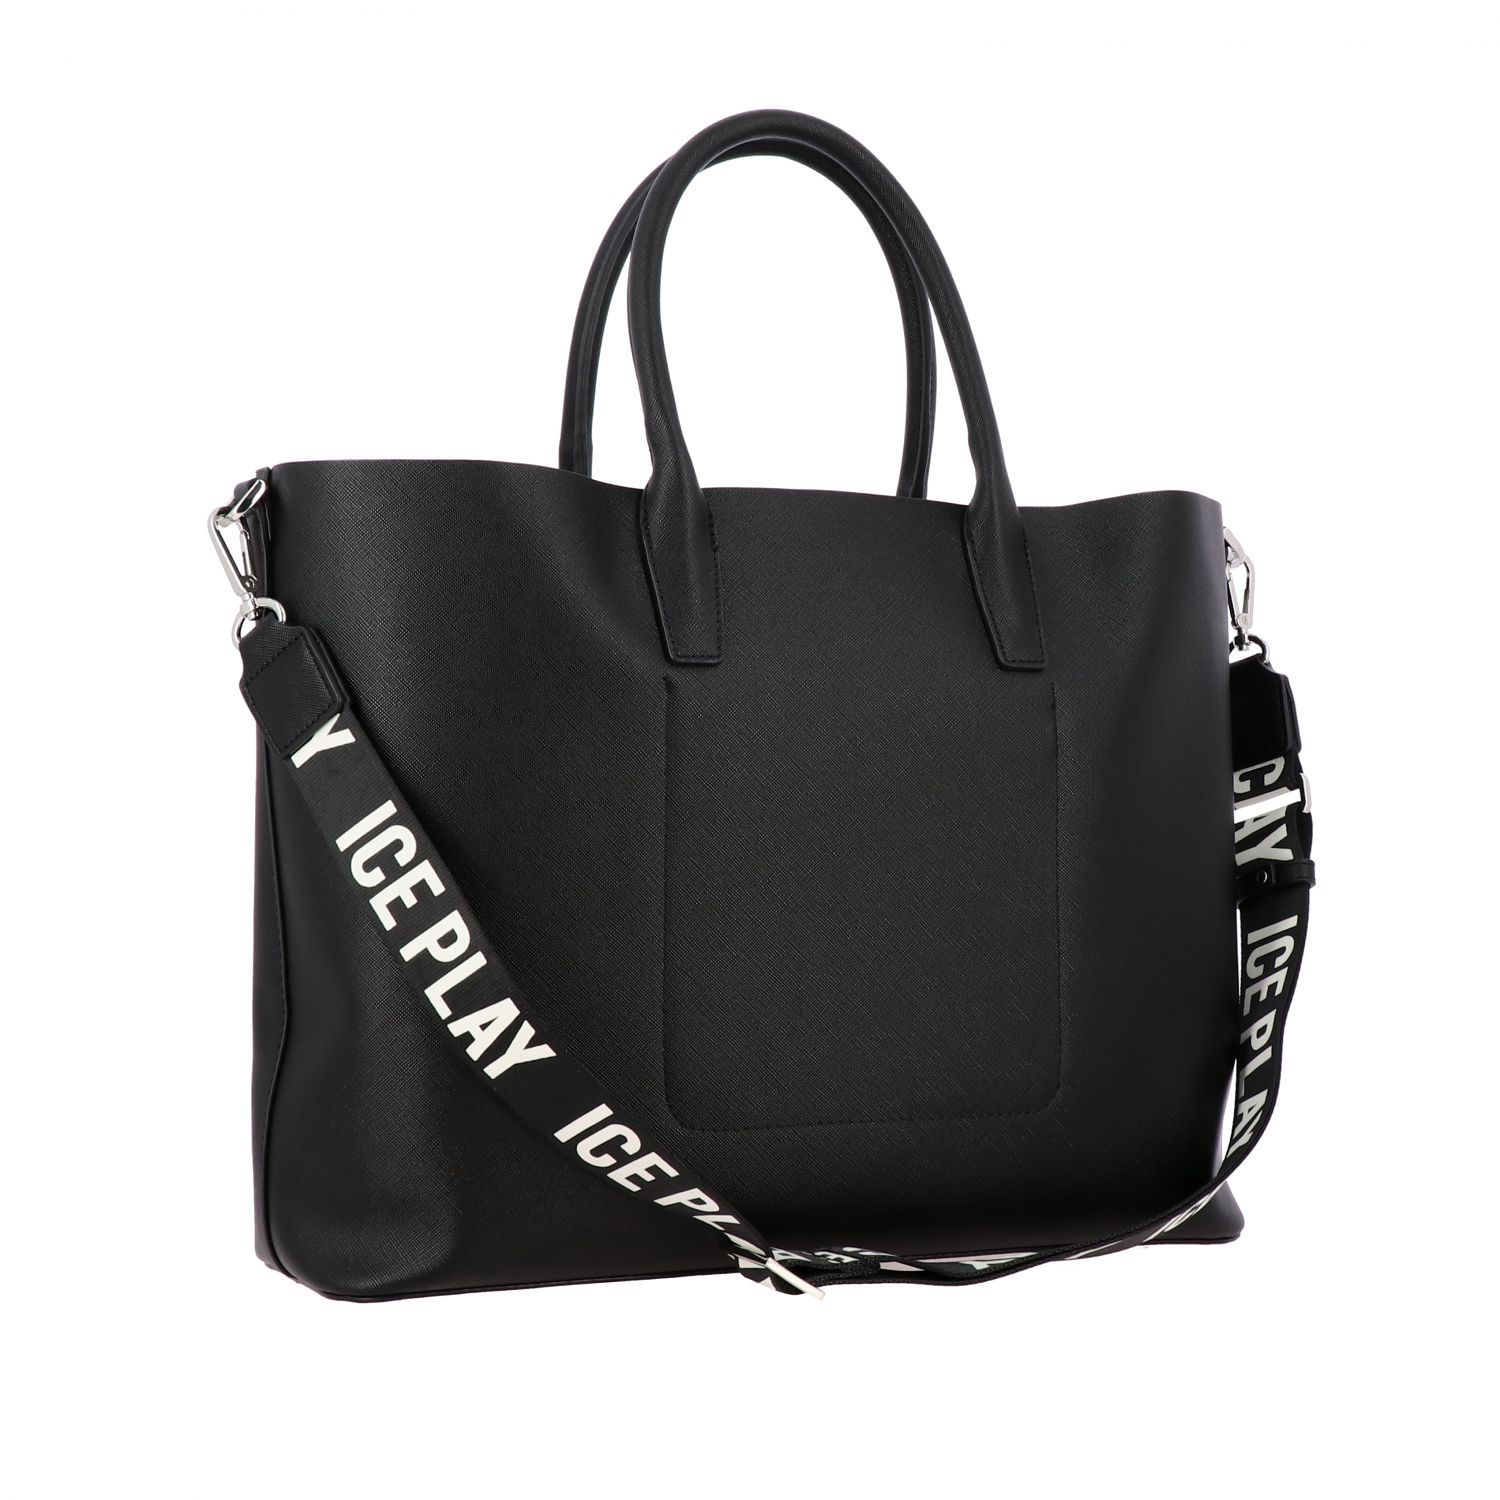 Ice Play Outlet: Tote bags woman - Black | Ice Play Tote Bags 7256 6939 ...